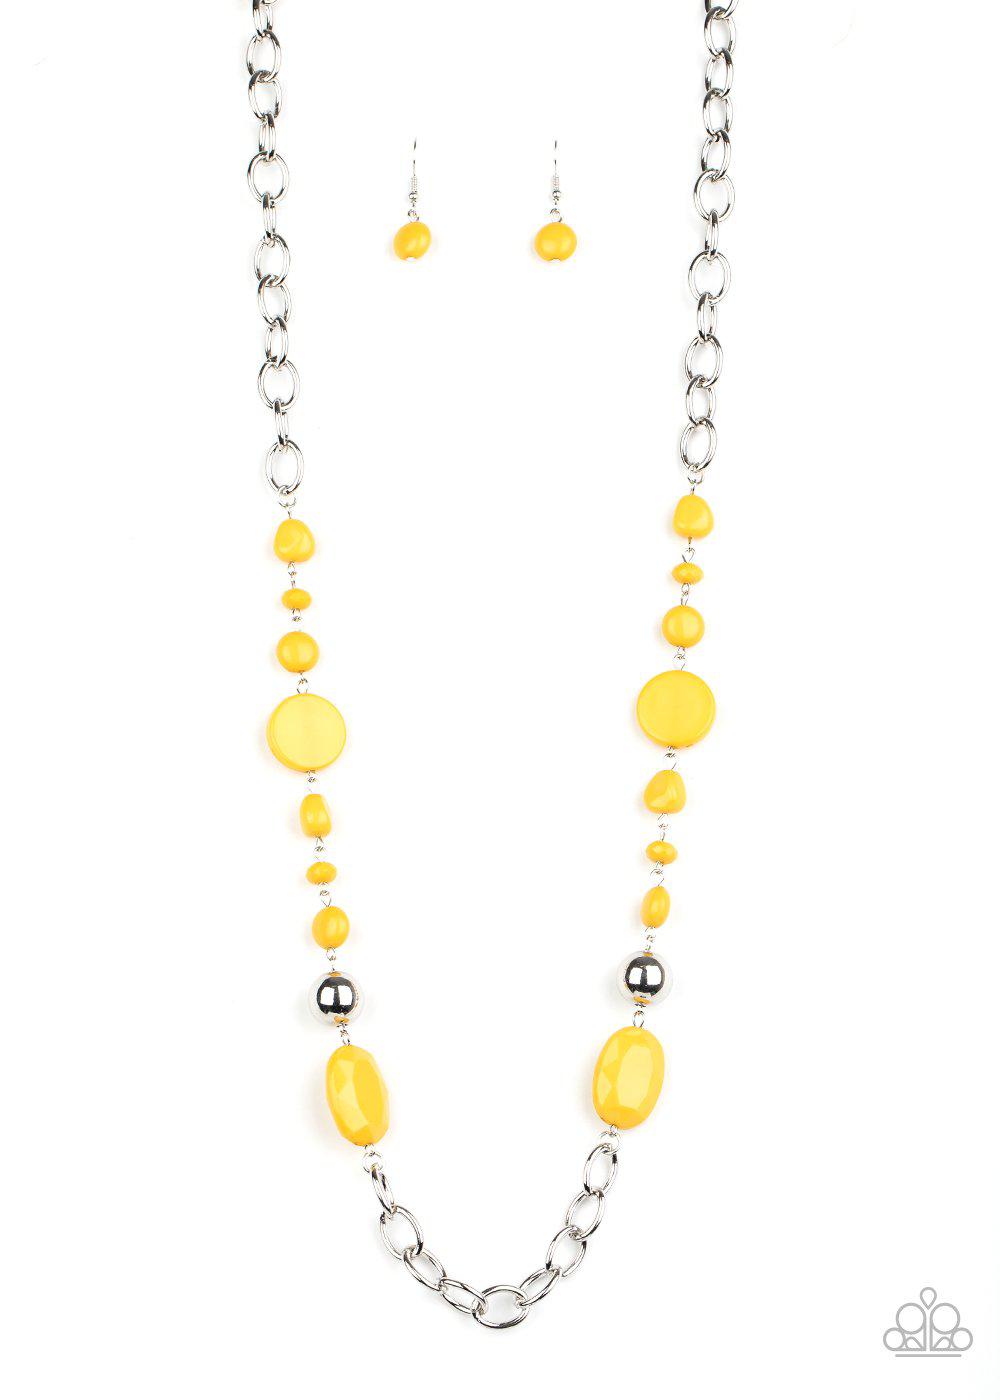 When I GLOW Up Yellow Necklace - Paparazzi Accessories-CarasShop.com - $5 Jewelry by Cara Jewels